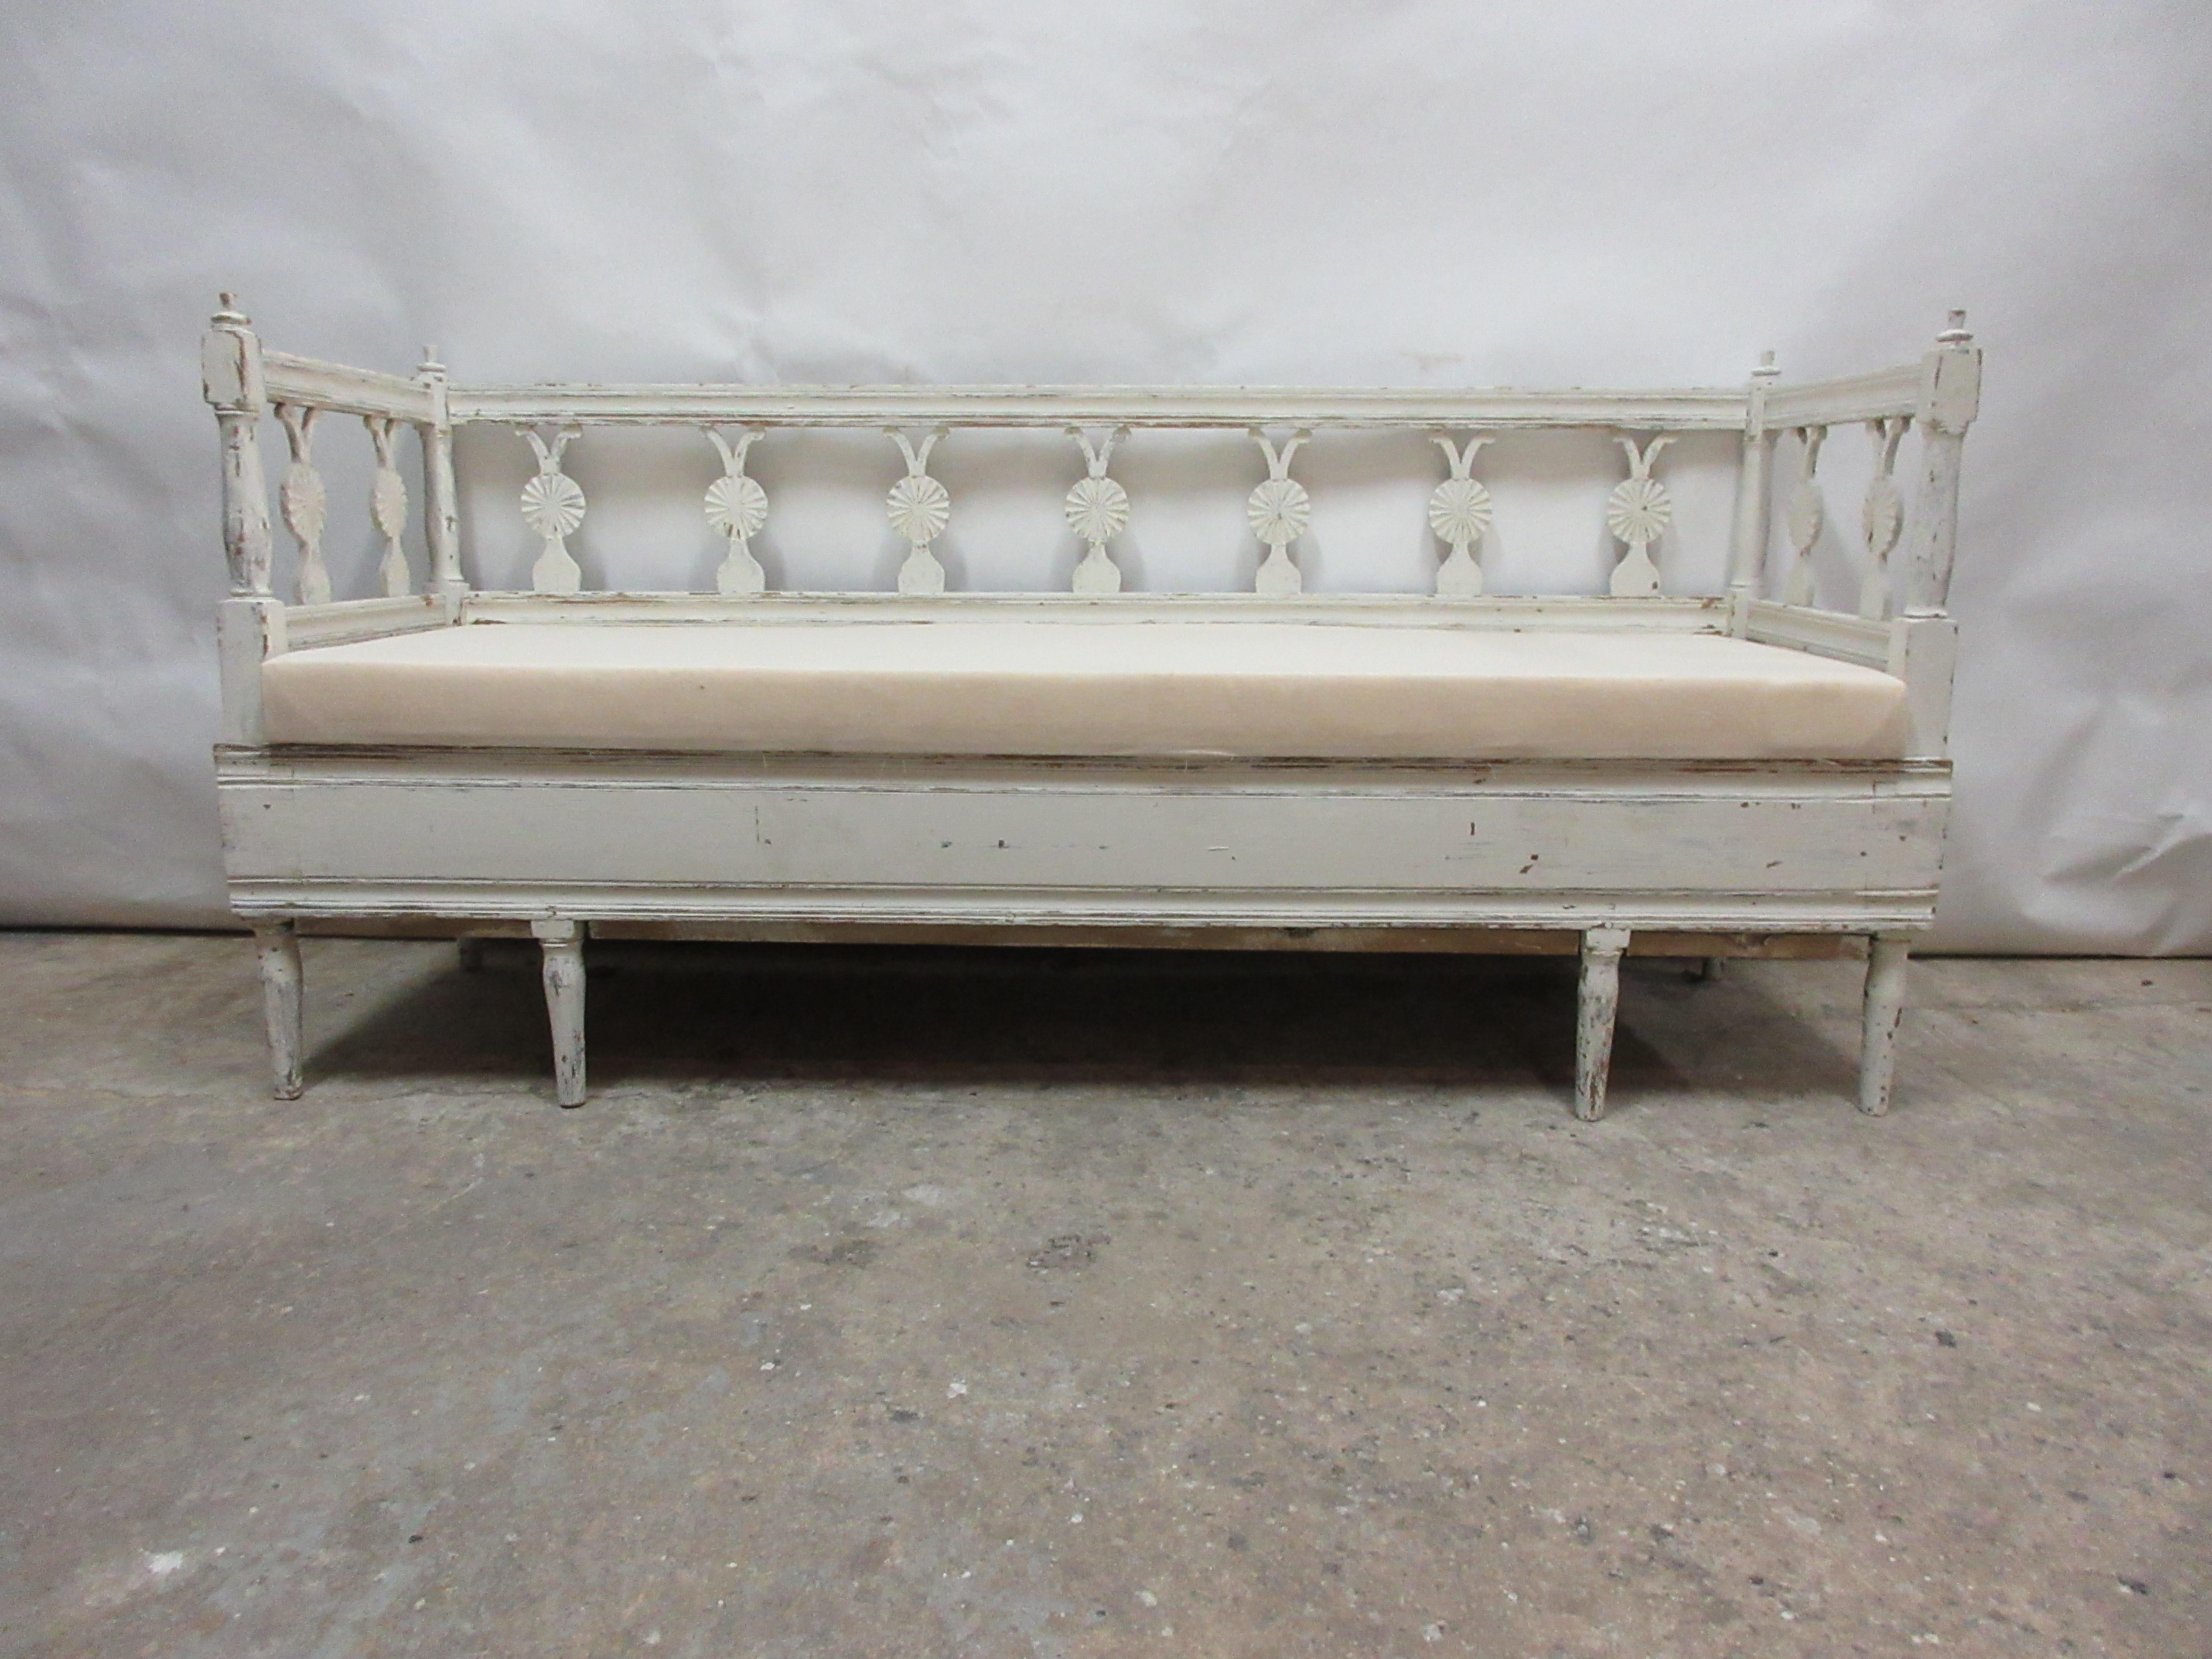 This is a 100% original Finish Swedish Gustavian sofa. Seating has been restored and covered in Muslin.